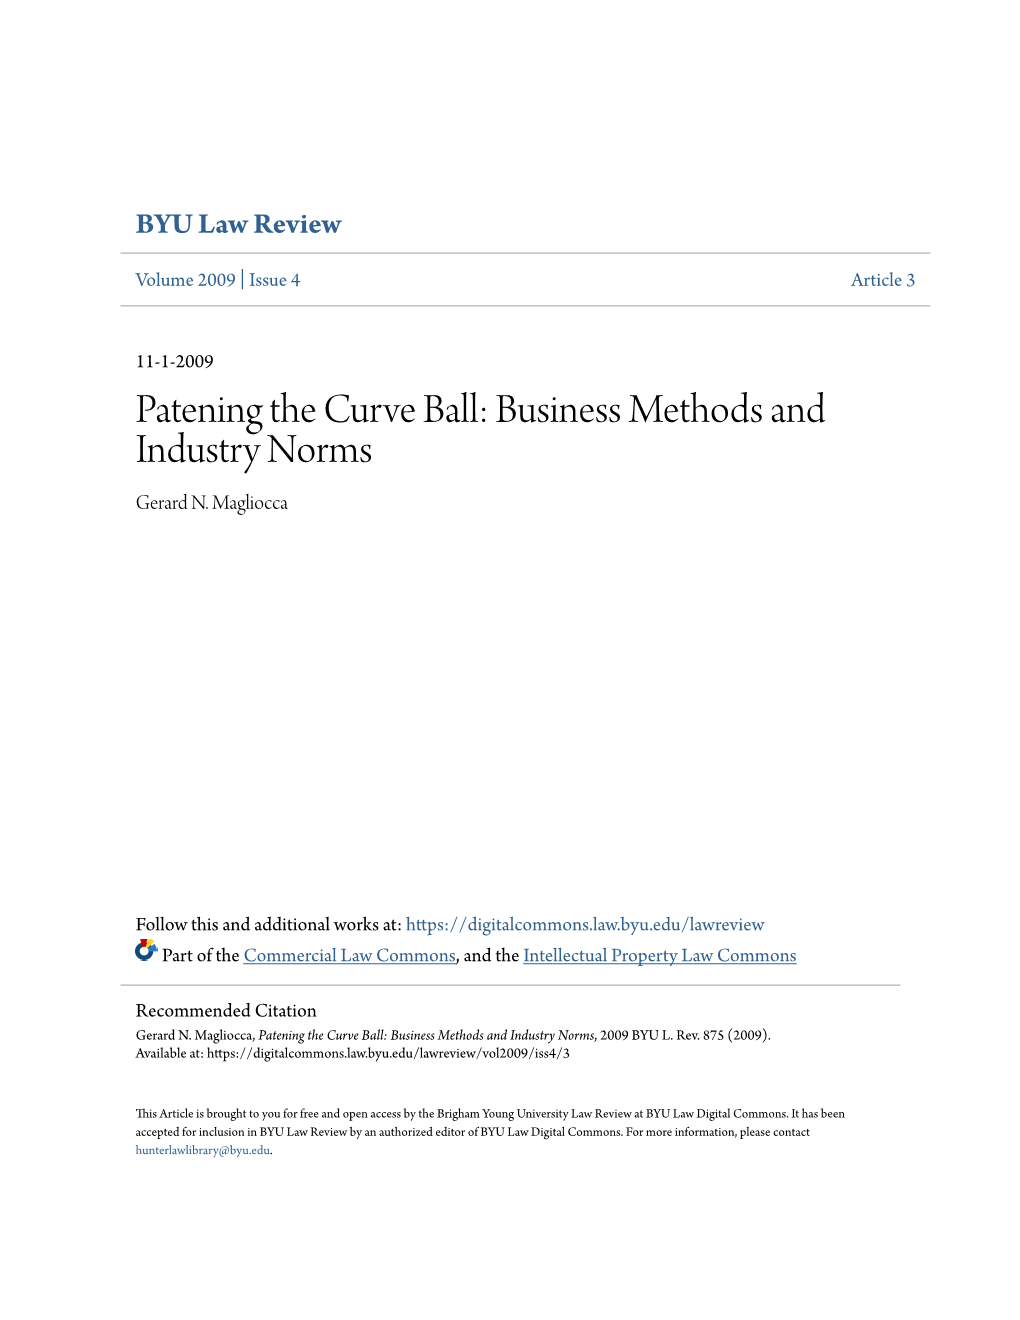 Patening the Curve Ball: Business Methods and Industry Norms Gerard N